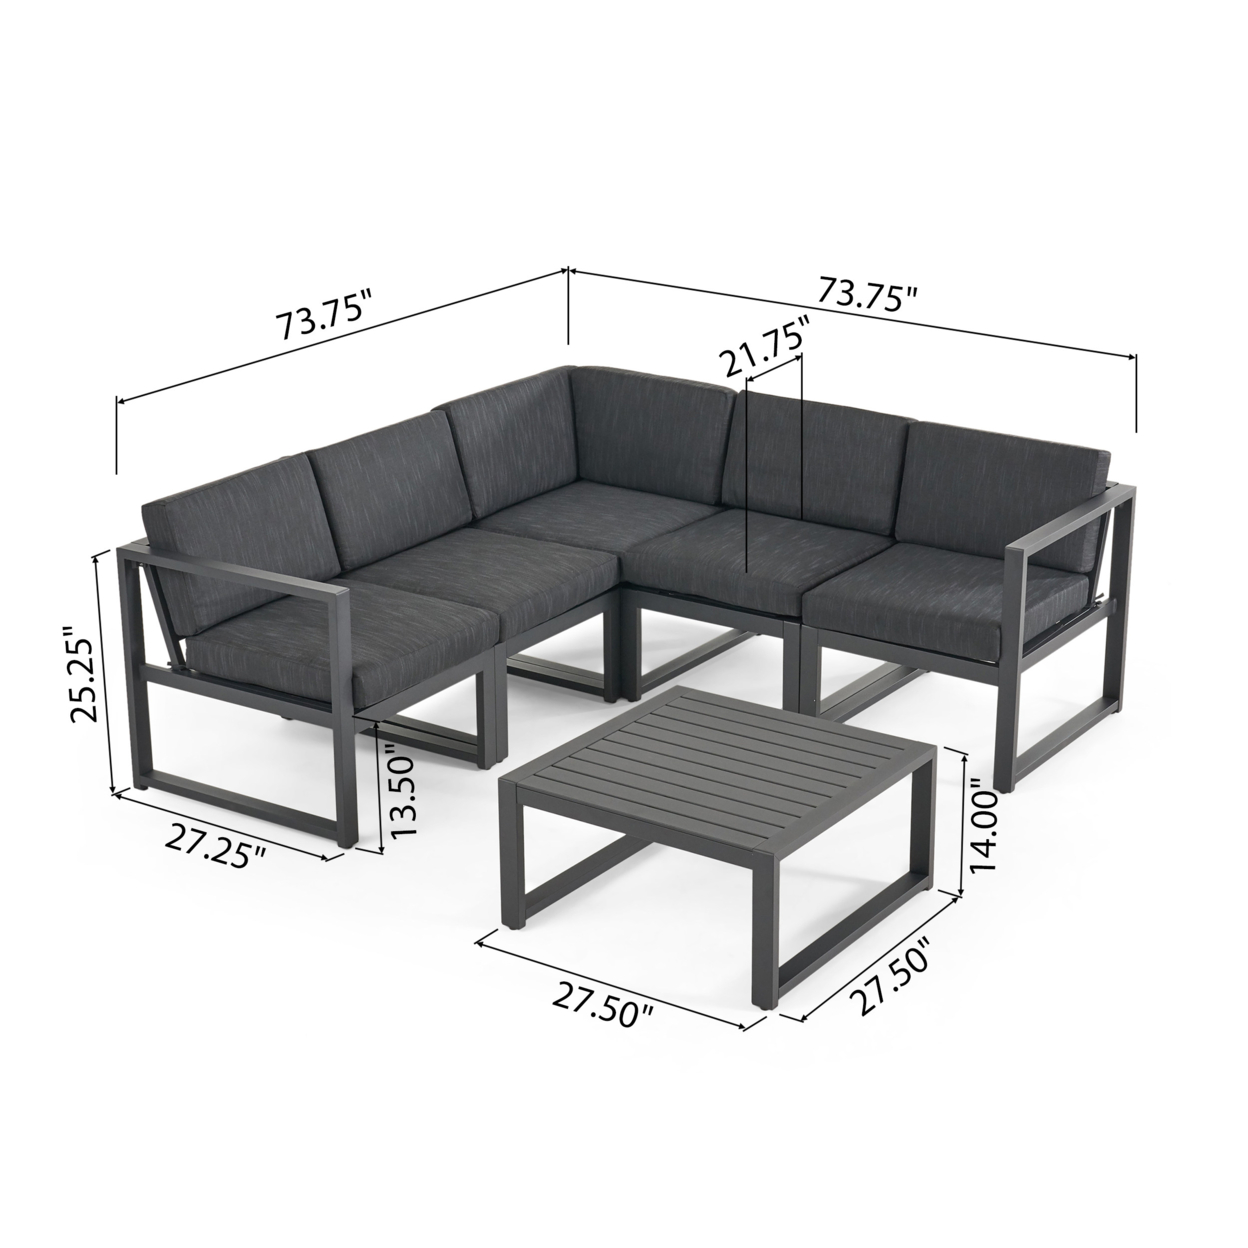 Amaryllis Outdoor 9 Seater Aluminum Sectional Sofa Set With Mesh Chaise Lounges